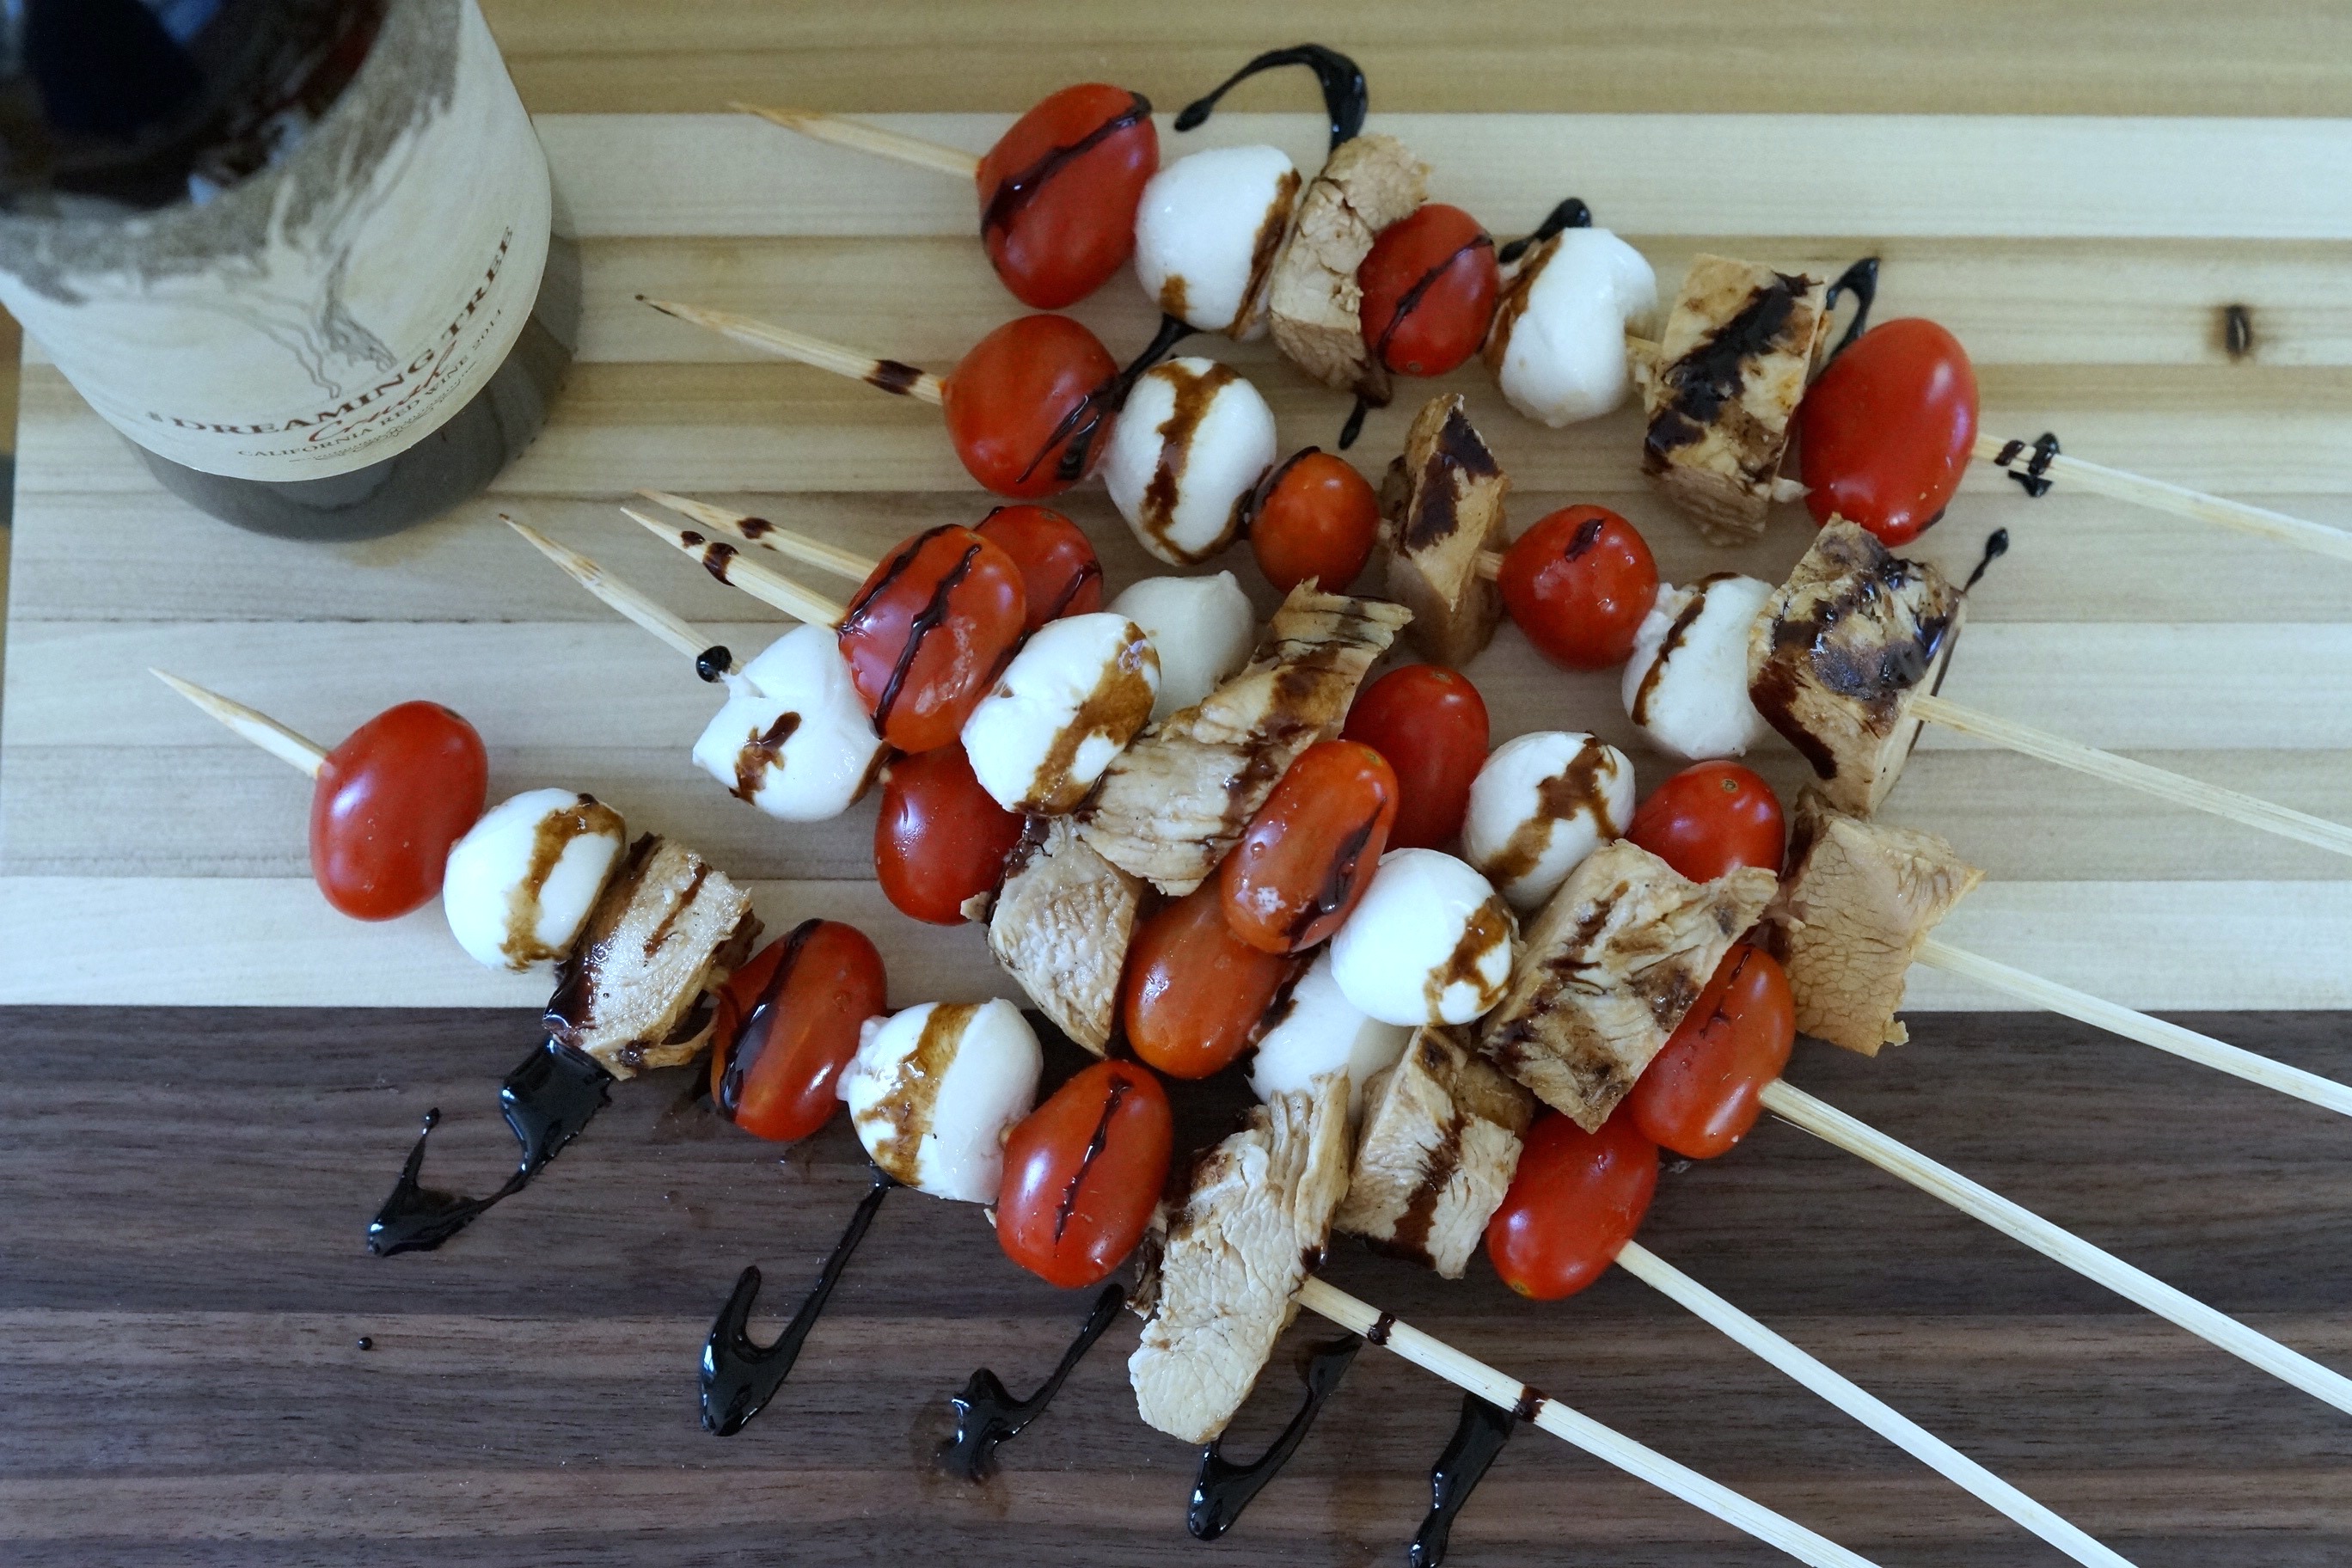 This recipe for Balsamic Grilled Chicken Skewers is simple and delicious. Perfect for sharing with friends and family. #ShareWineAndBites